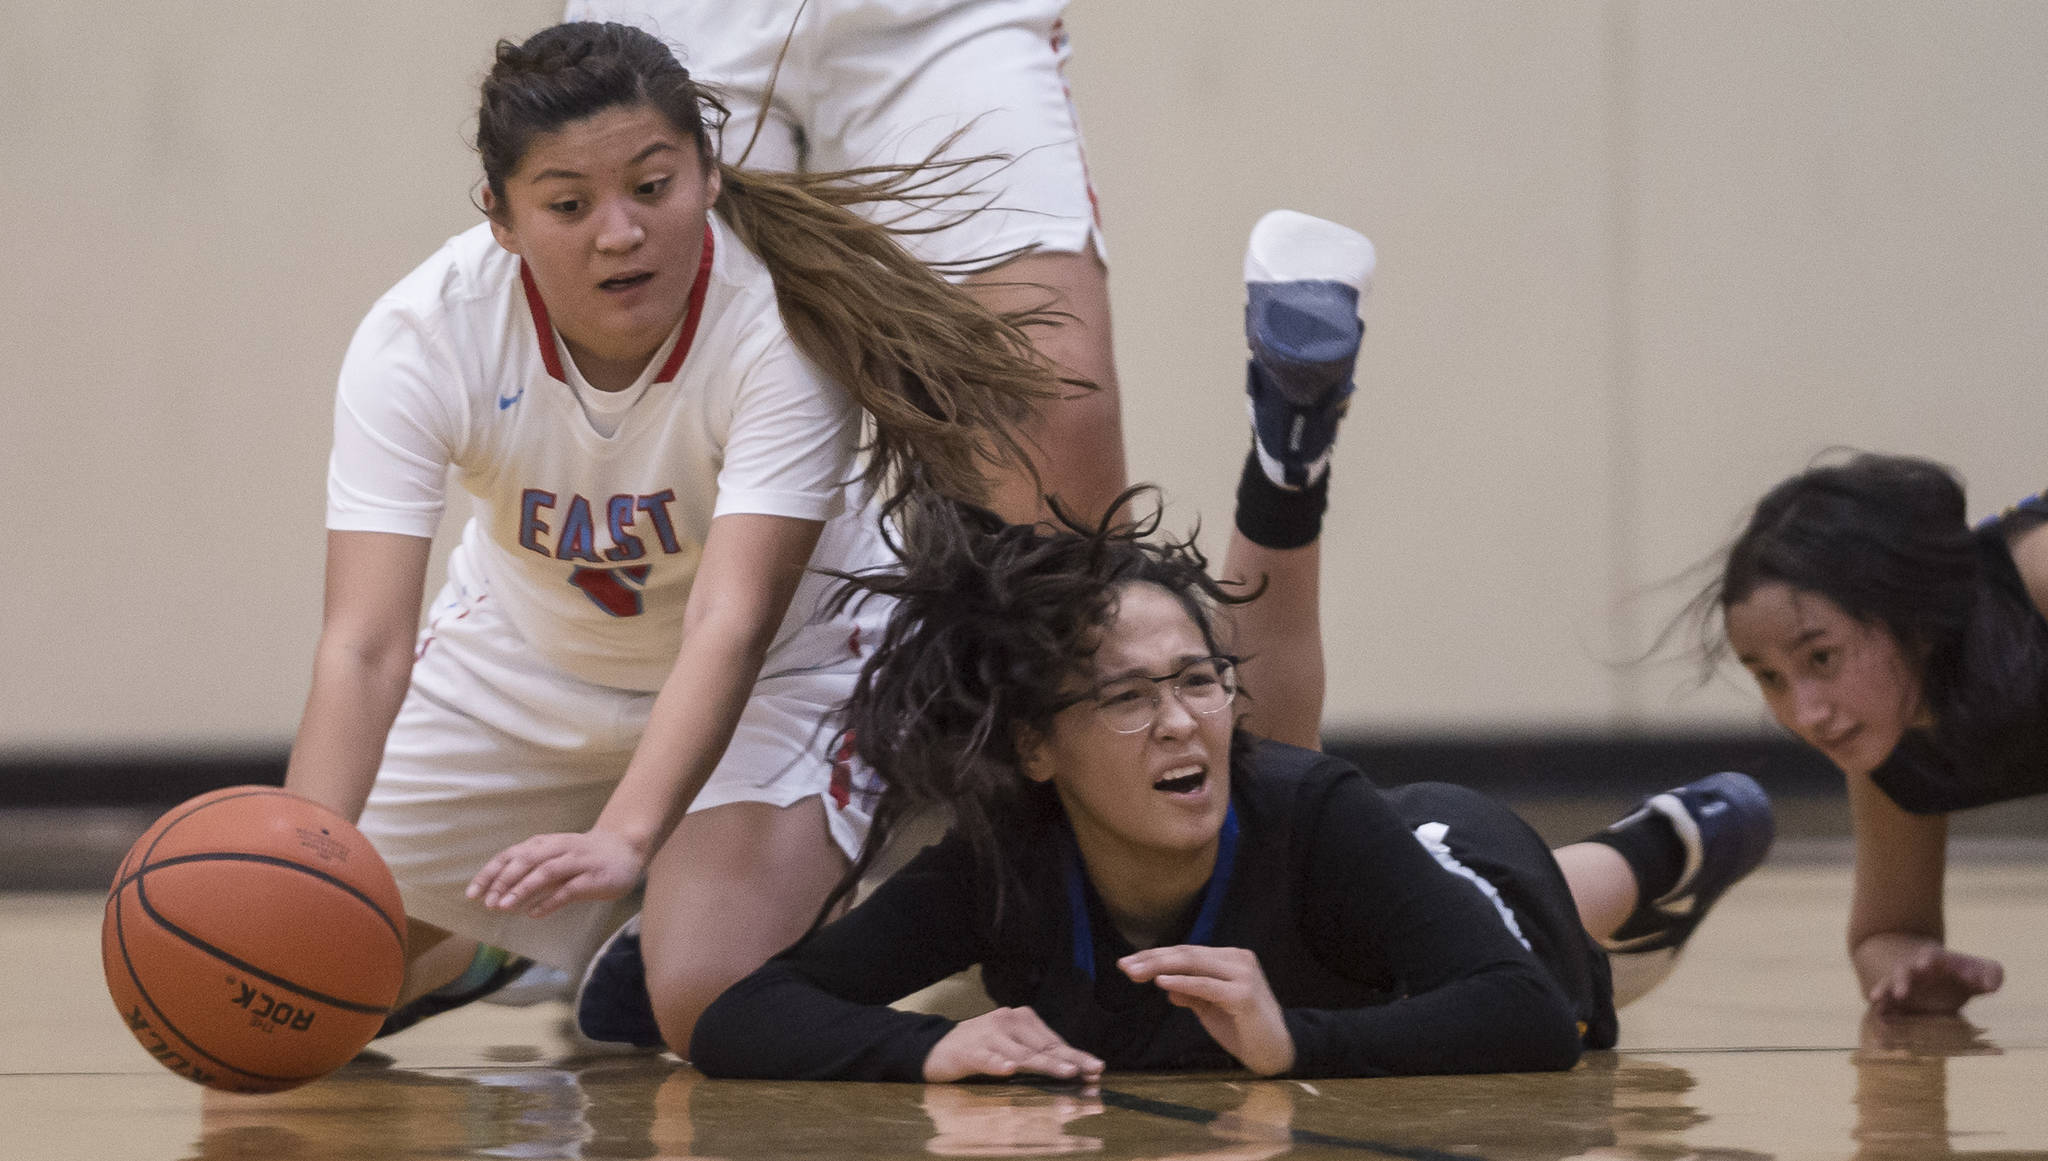 East’s Jayla Jordan, left, and Barrow’s Caitlyn Brower, center, and Justine Balanza scramble for the loose ball at the Princess Cruises Capital City Classic at Juneau-Douglas High School on Thursday, Dec. 27, 2018. (Michael Penn | Juneau Empire)